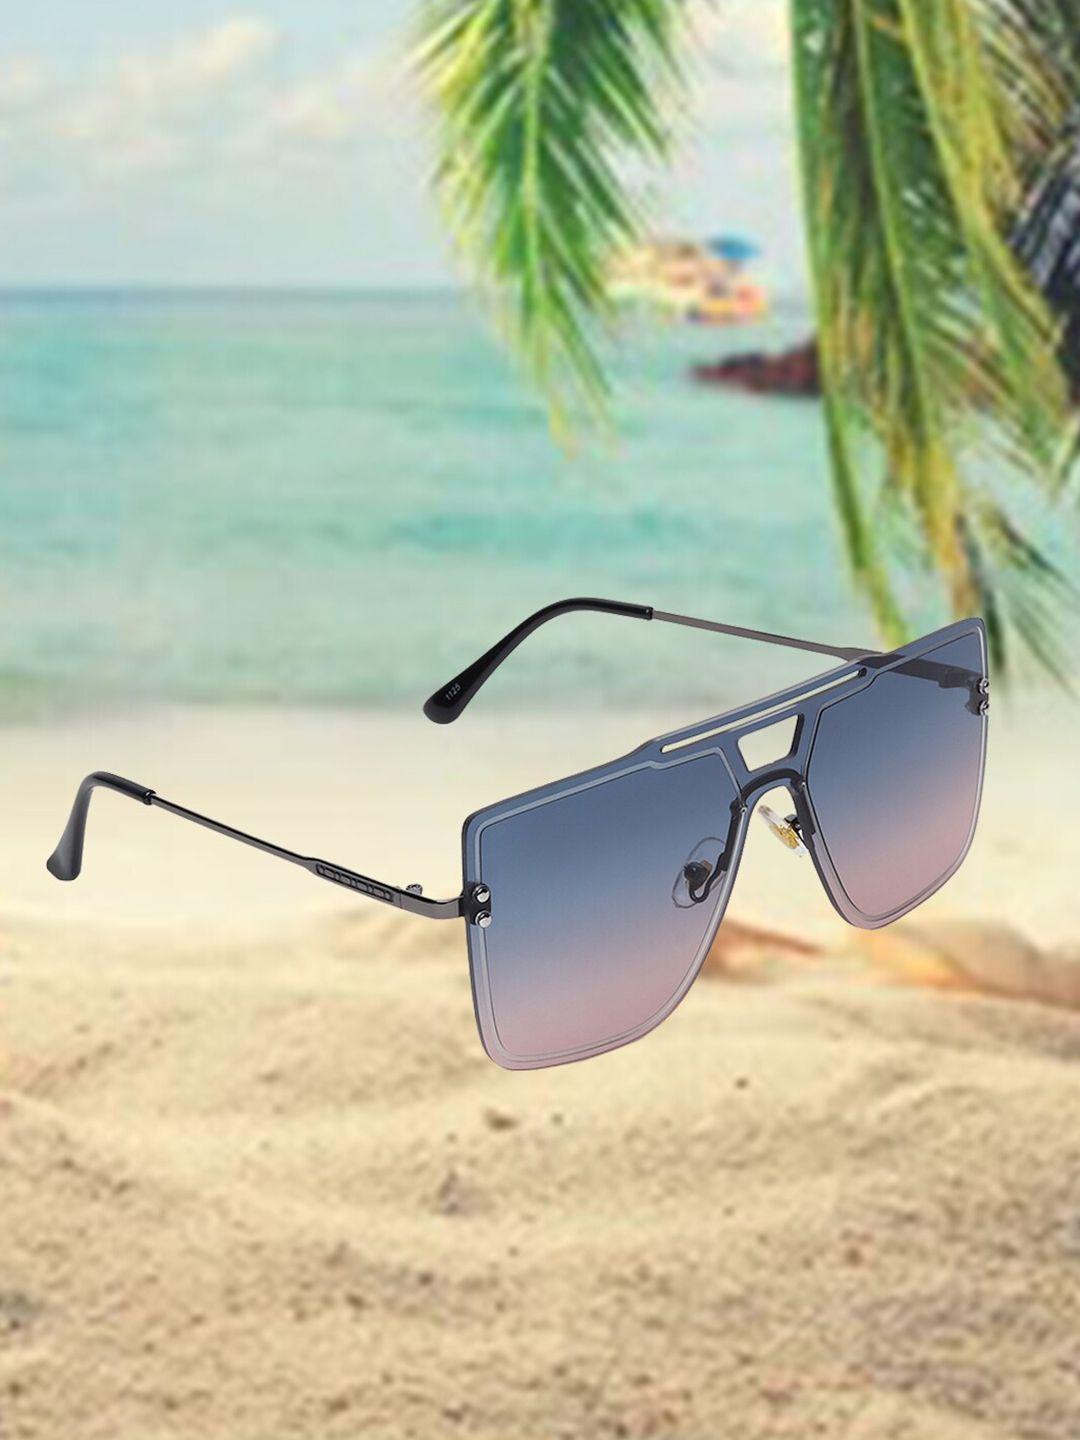 celebrity sunglasses rimless square sunglasses with uv protected lens- clsg-1125-04